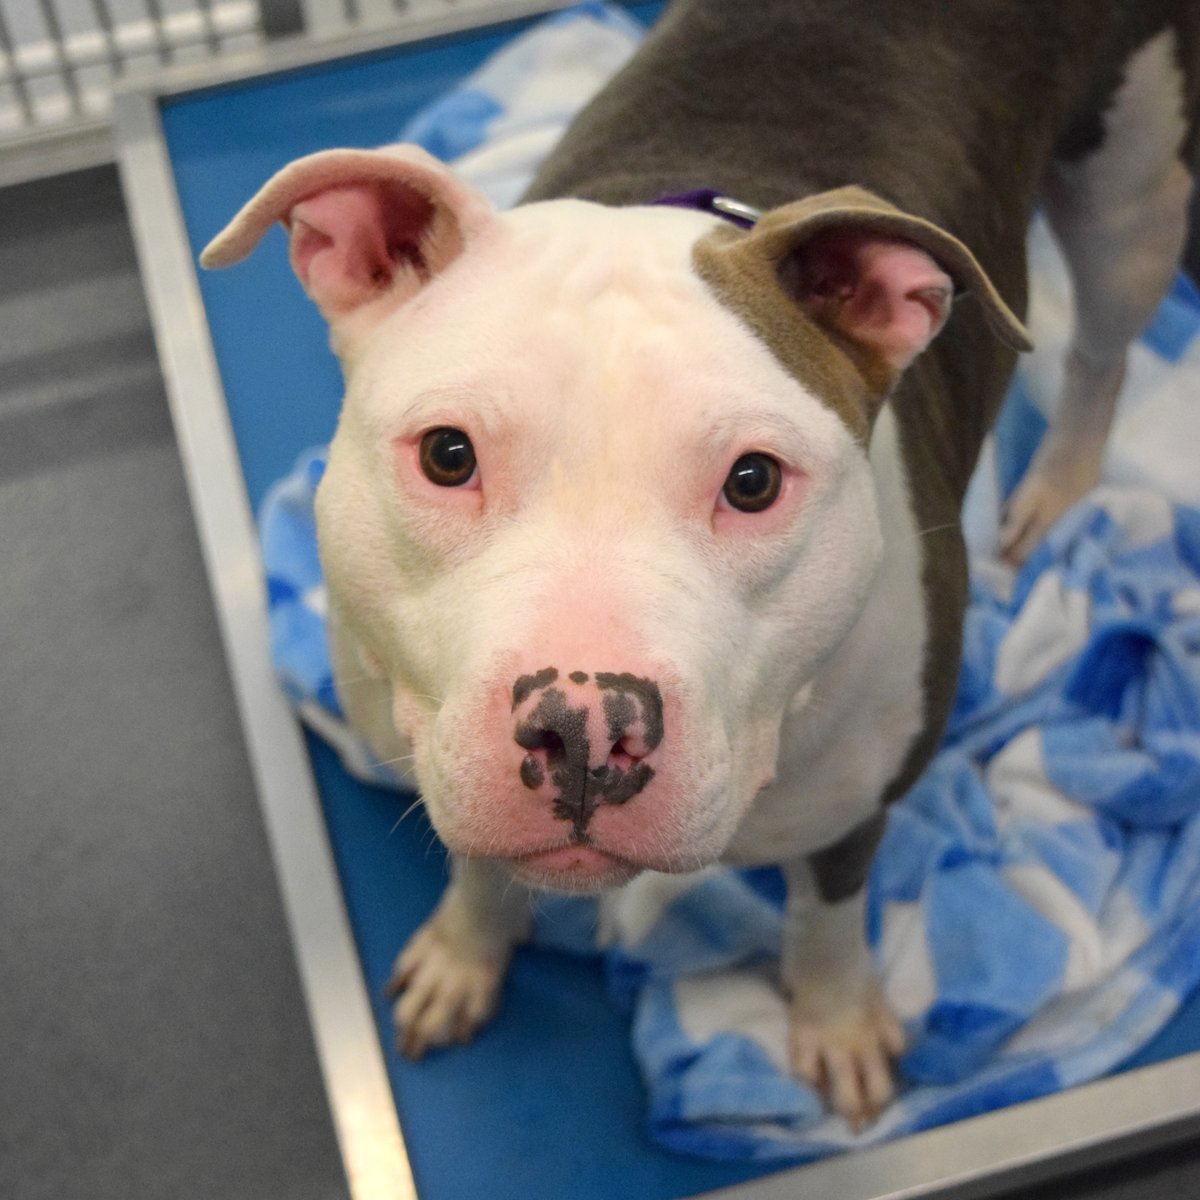 'Stare deeply into my eyes and try not to fall in love with me!' -Gloria, probably 😍 This sweet mama came to our Maryland Heights shelter as a stray. Gloria is a 3-year-old Pittie mix with a quiet, gentle demeanor. Meet her at our Maryland Heights shelter 💕 #adoptdontshop